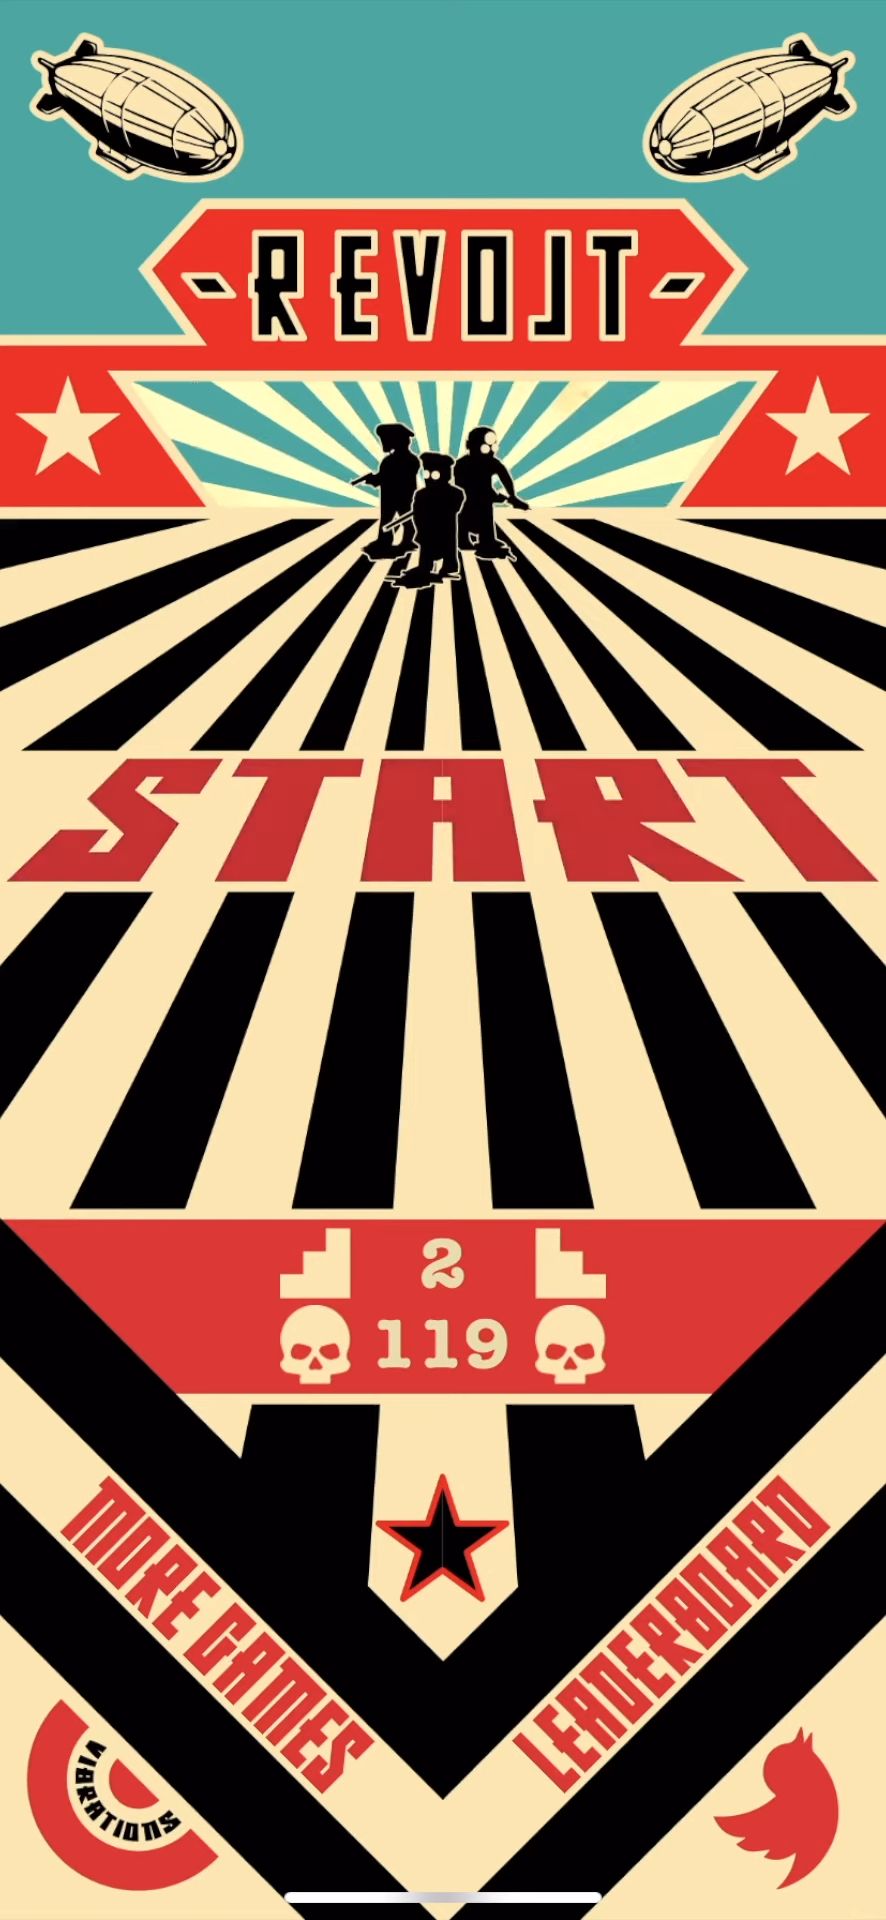 Download -REVOLT- Android free game.